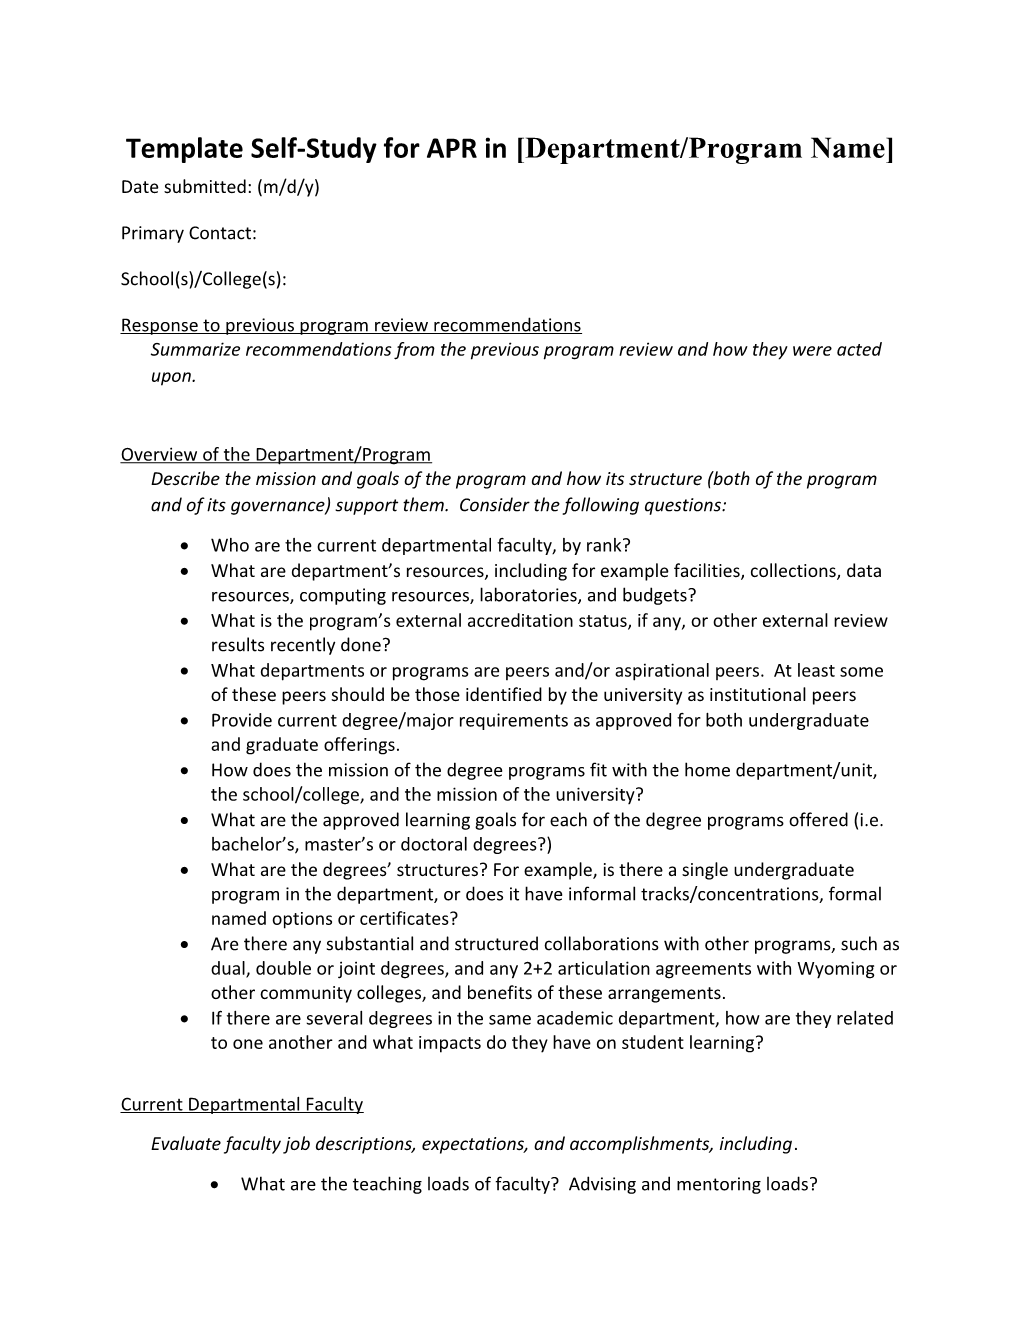 Self-Study Template for Academic Program Review